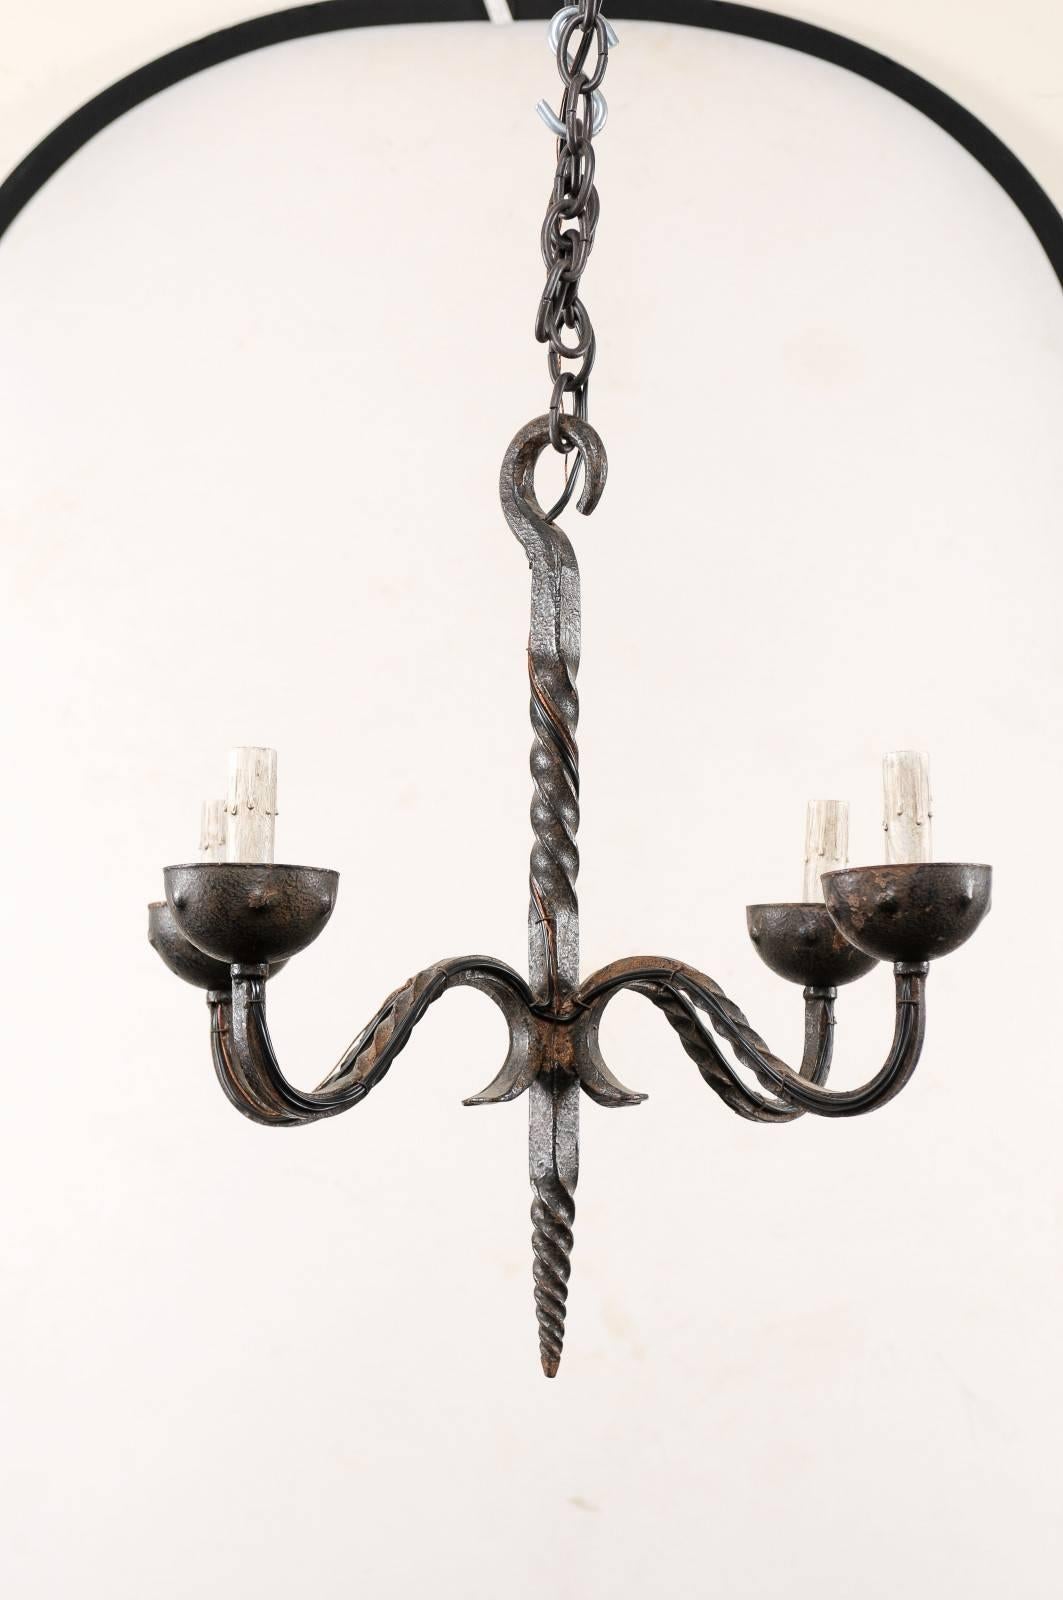 A French vintage four-light wrought iron chandelier. This mid-20th century French chandelier features a central metal twisted central column with four swagged and nicely twisted arms flowing out from it's centre. The arms each terminate into cupped